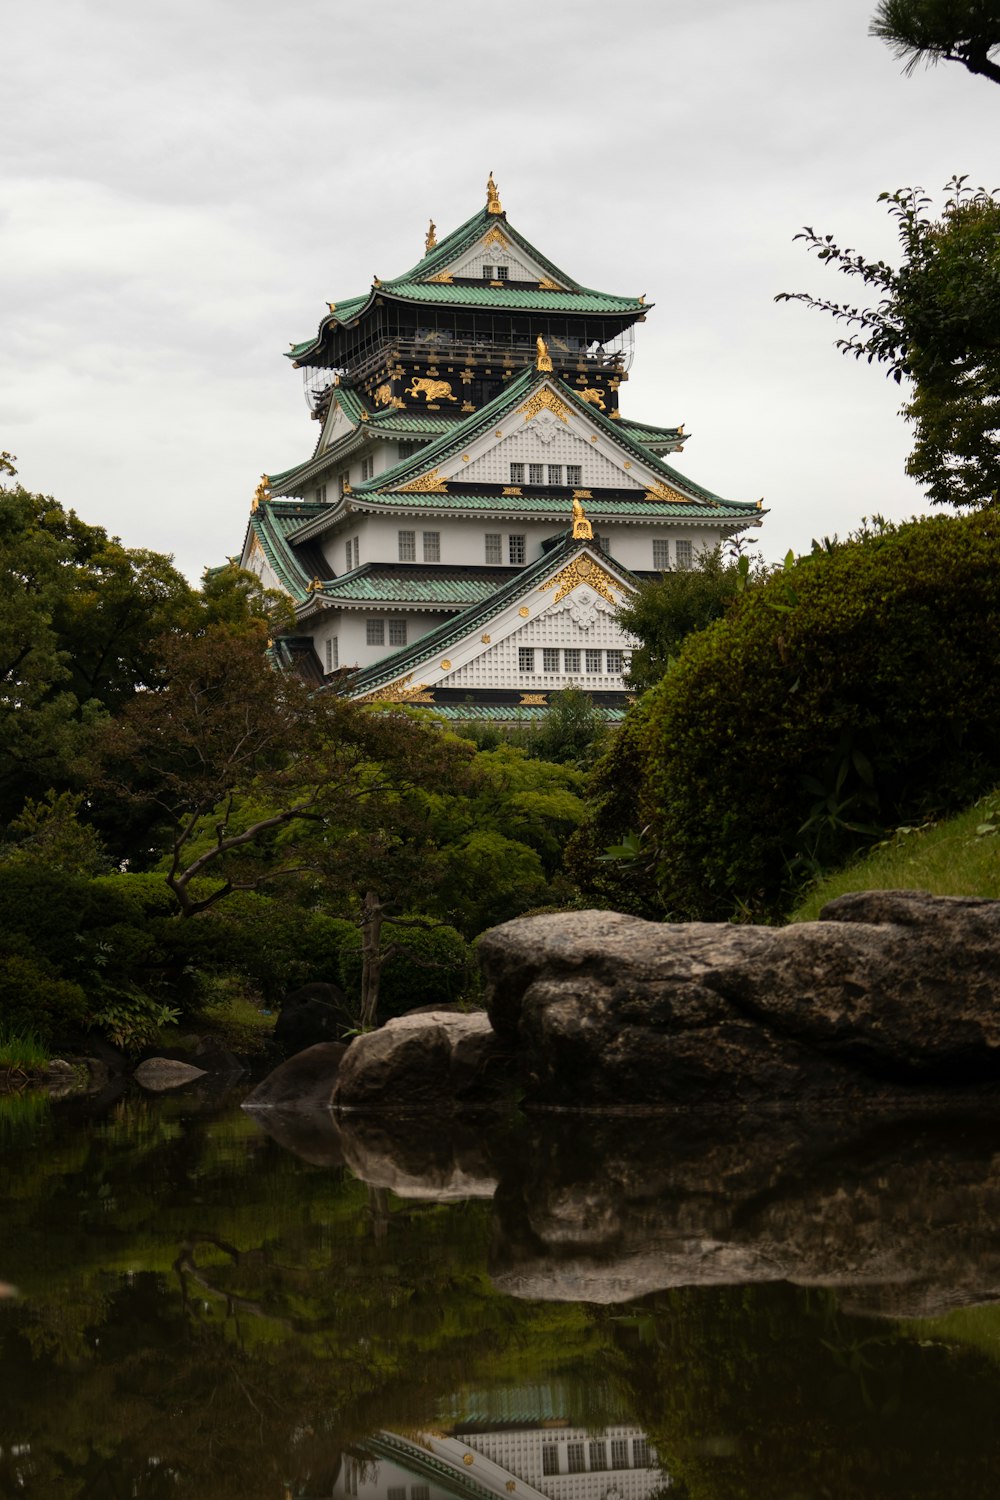 Osaka Castle with a green roof surrounded by trees and rocks